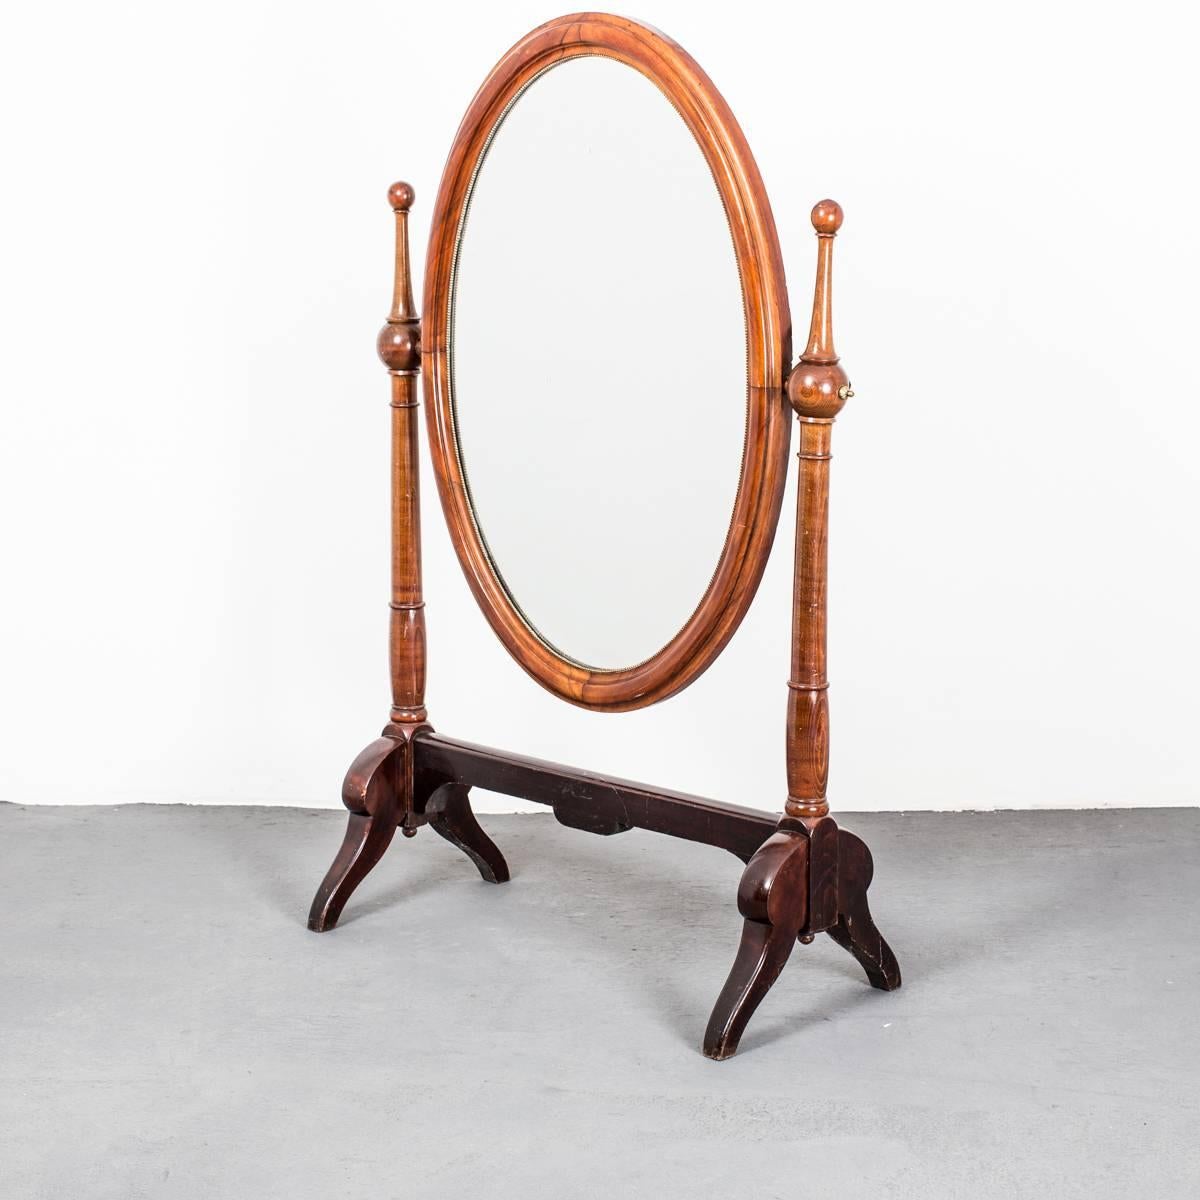 A standing mirror made during the early 19th century in mahogany. Oval shaped mirror with a pearl beaded inner edge. Details in brass.